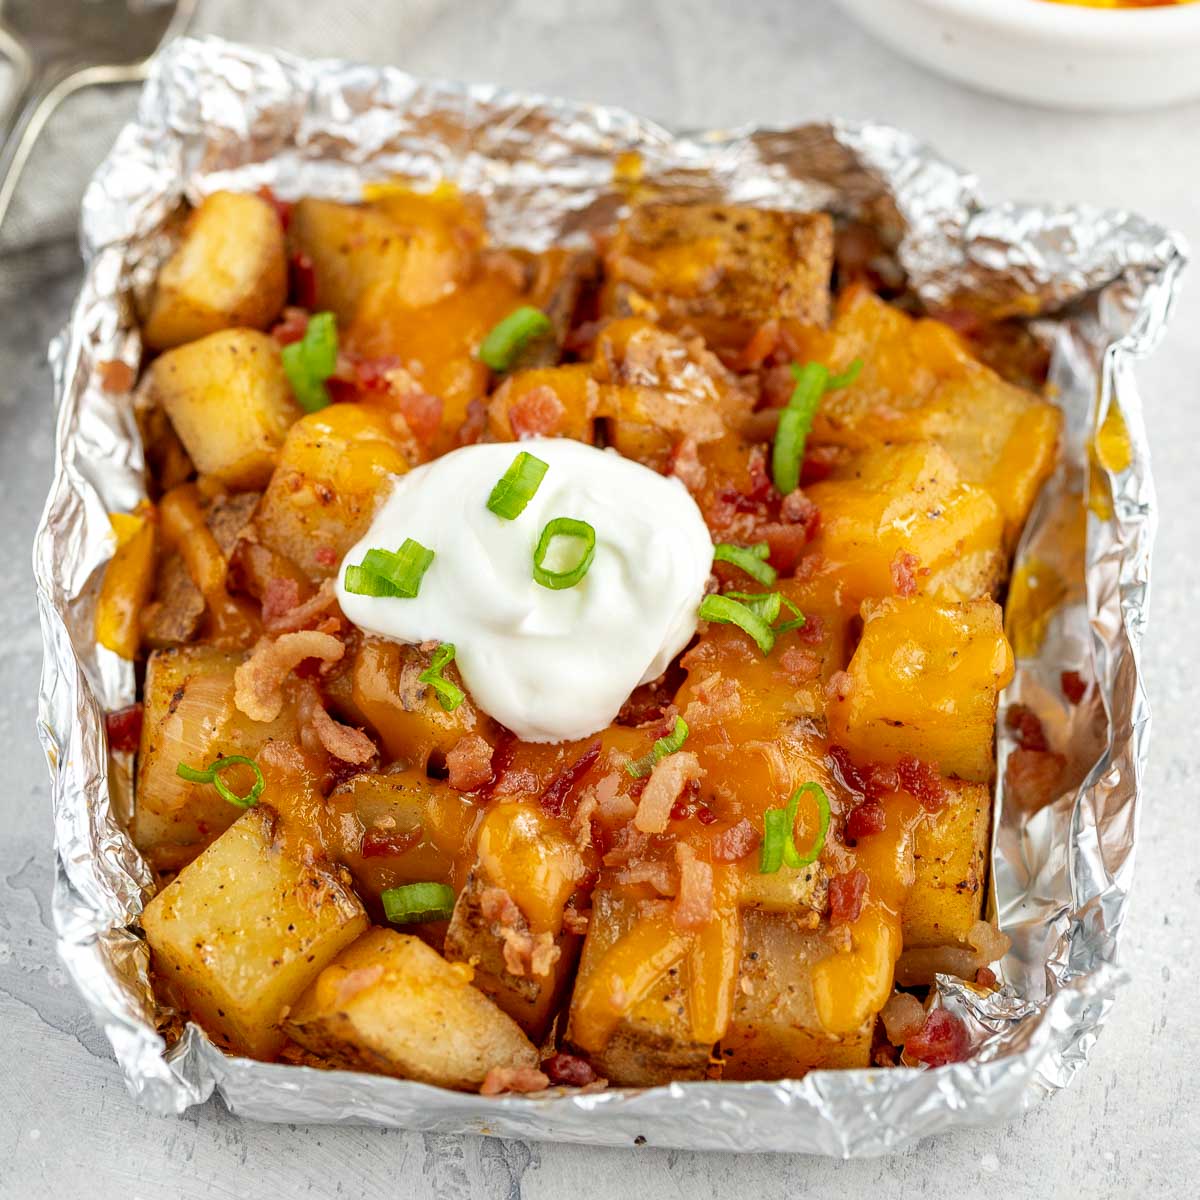 Potatoes in foil toped with cheese, bacon, and sour cream.